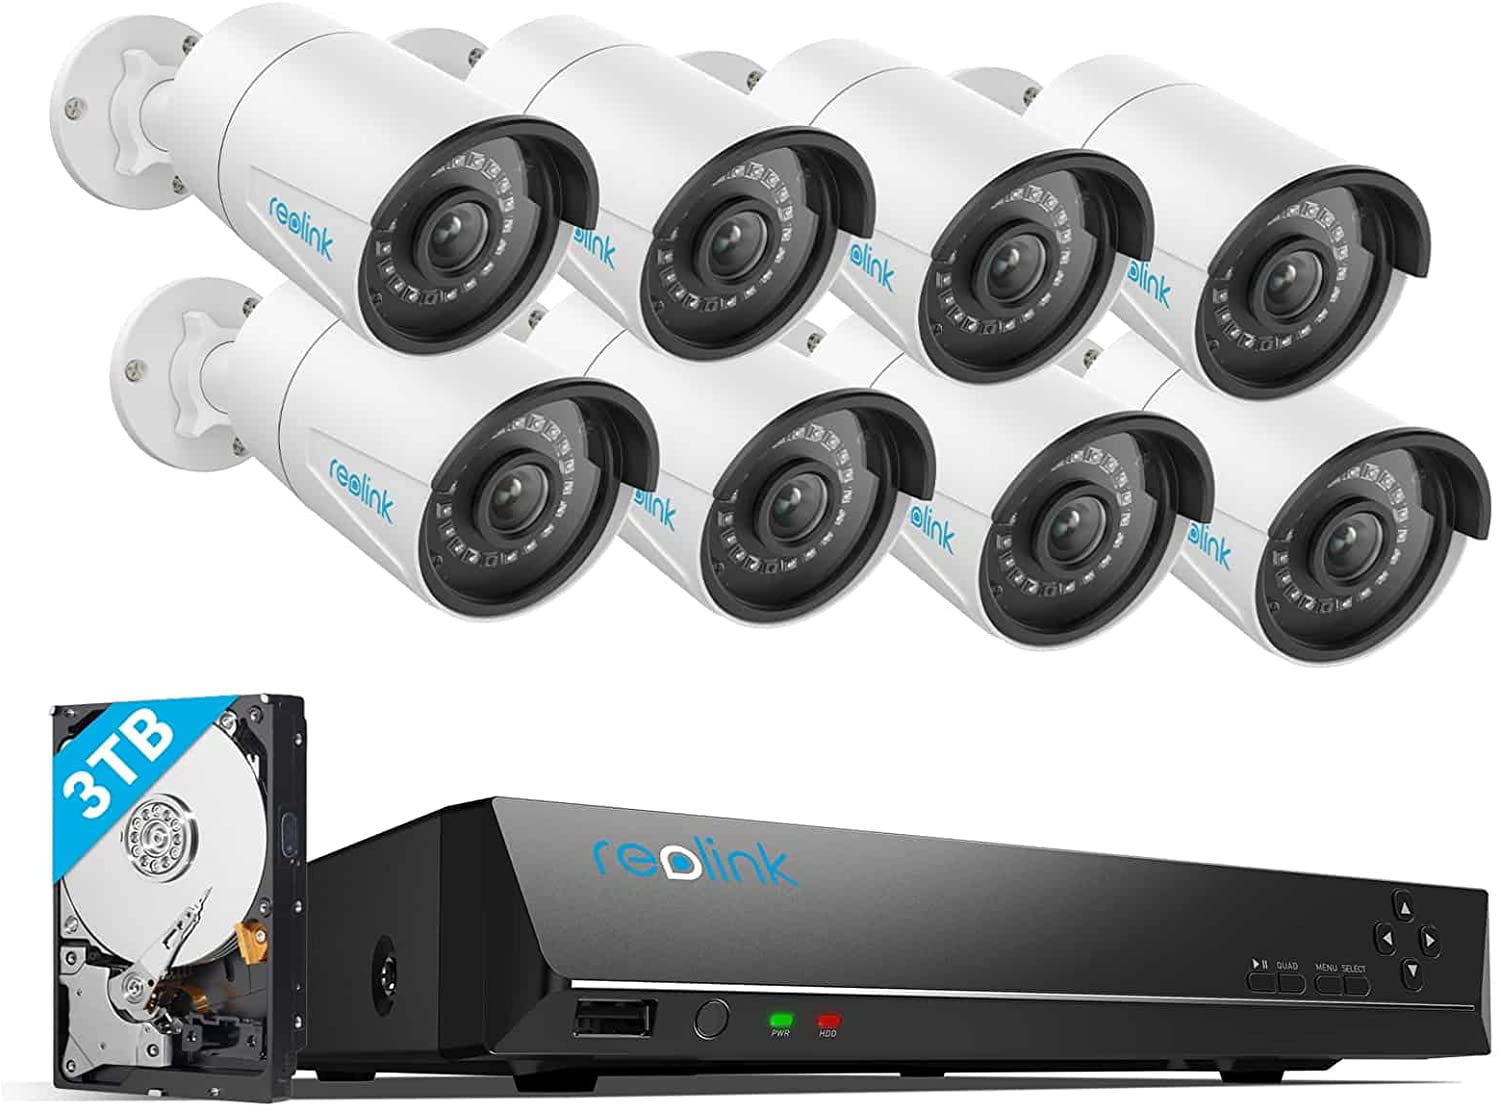 RLK16-800D8 Reolink 【2020 NEW】 4K 16CH PoE CCTV Camera Systems 8pcs 8MP Four Times 1080P PoE IP Security Cameras Outdoor Weatherproof Night Vision 24/7 Video Recording Audio 4K NVR with 3TB HDD